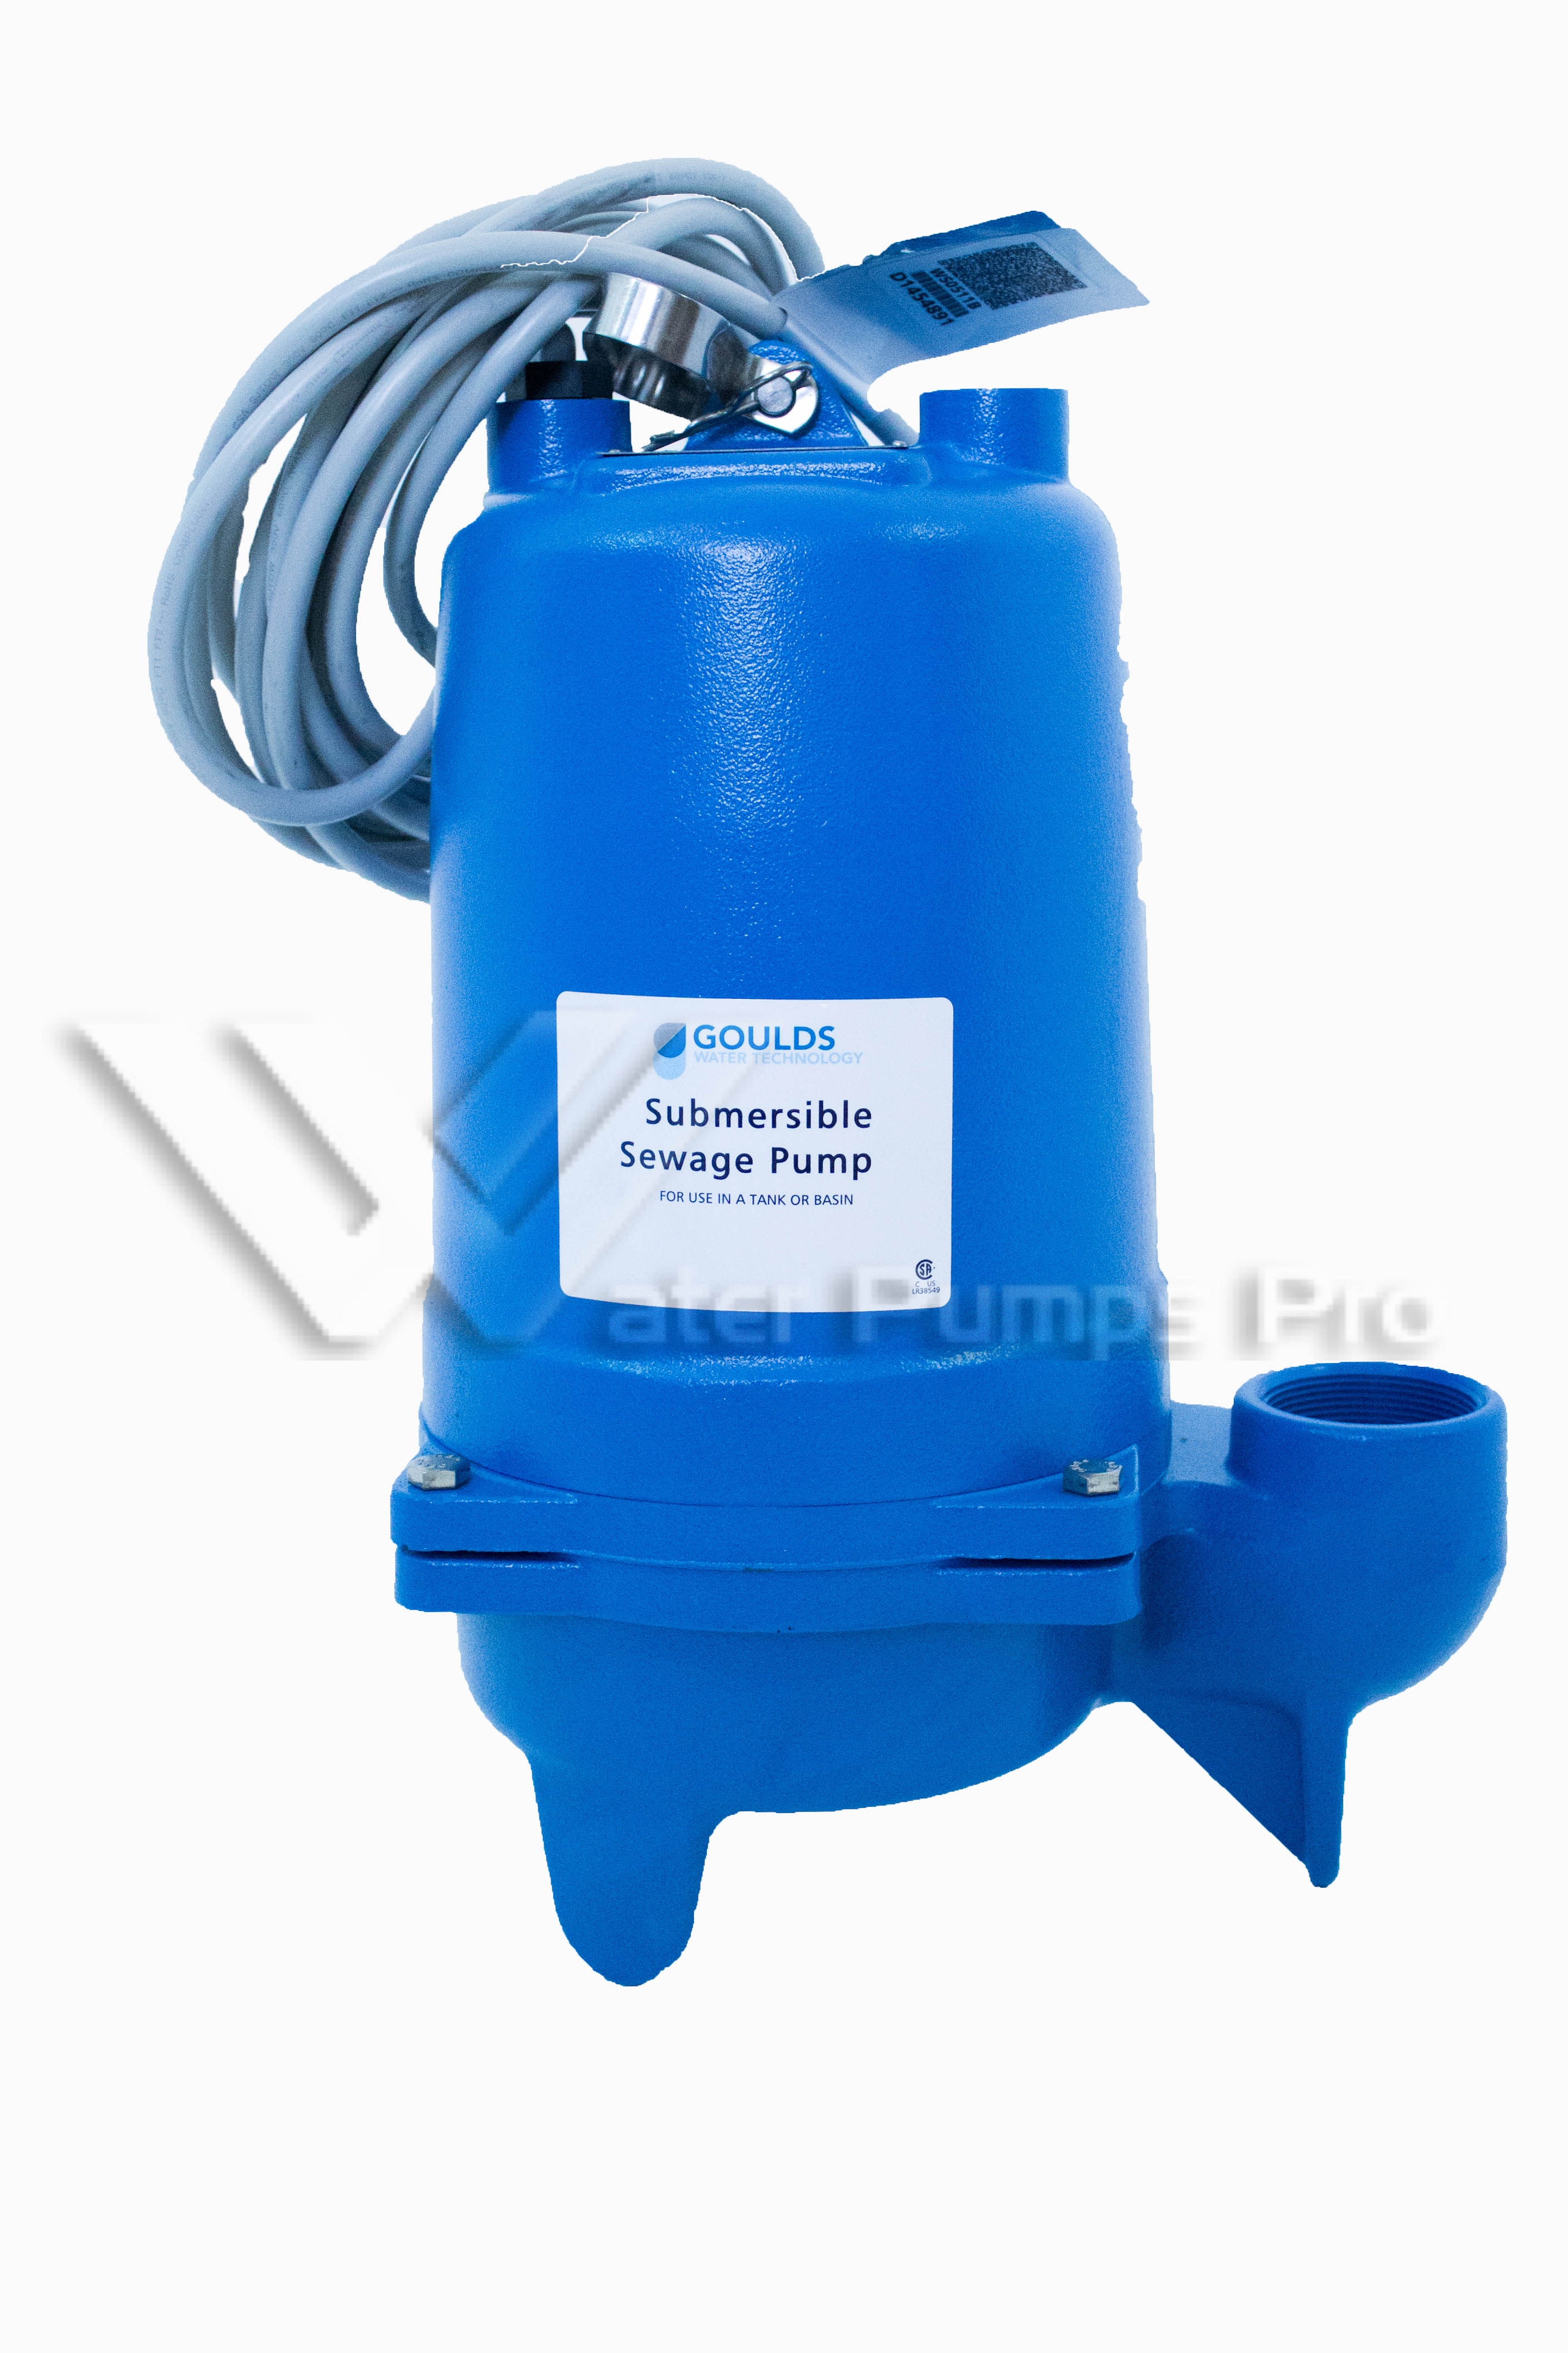 Goulds WS0511B Submersiblle Sewage Pump 3886 1/2HP 115V 1 Phase - Click Image to Close